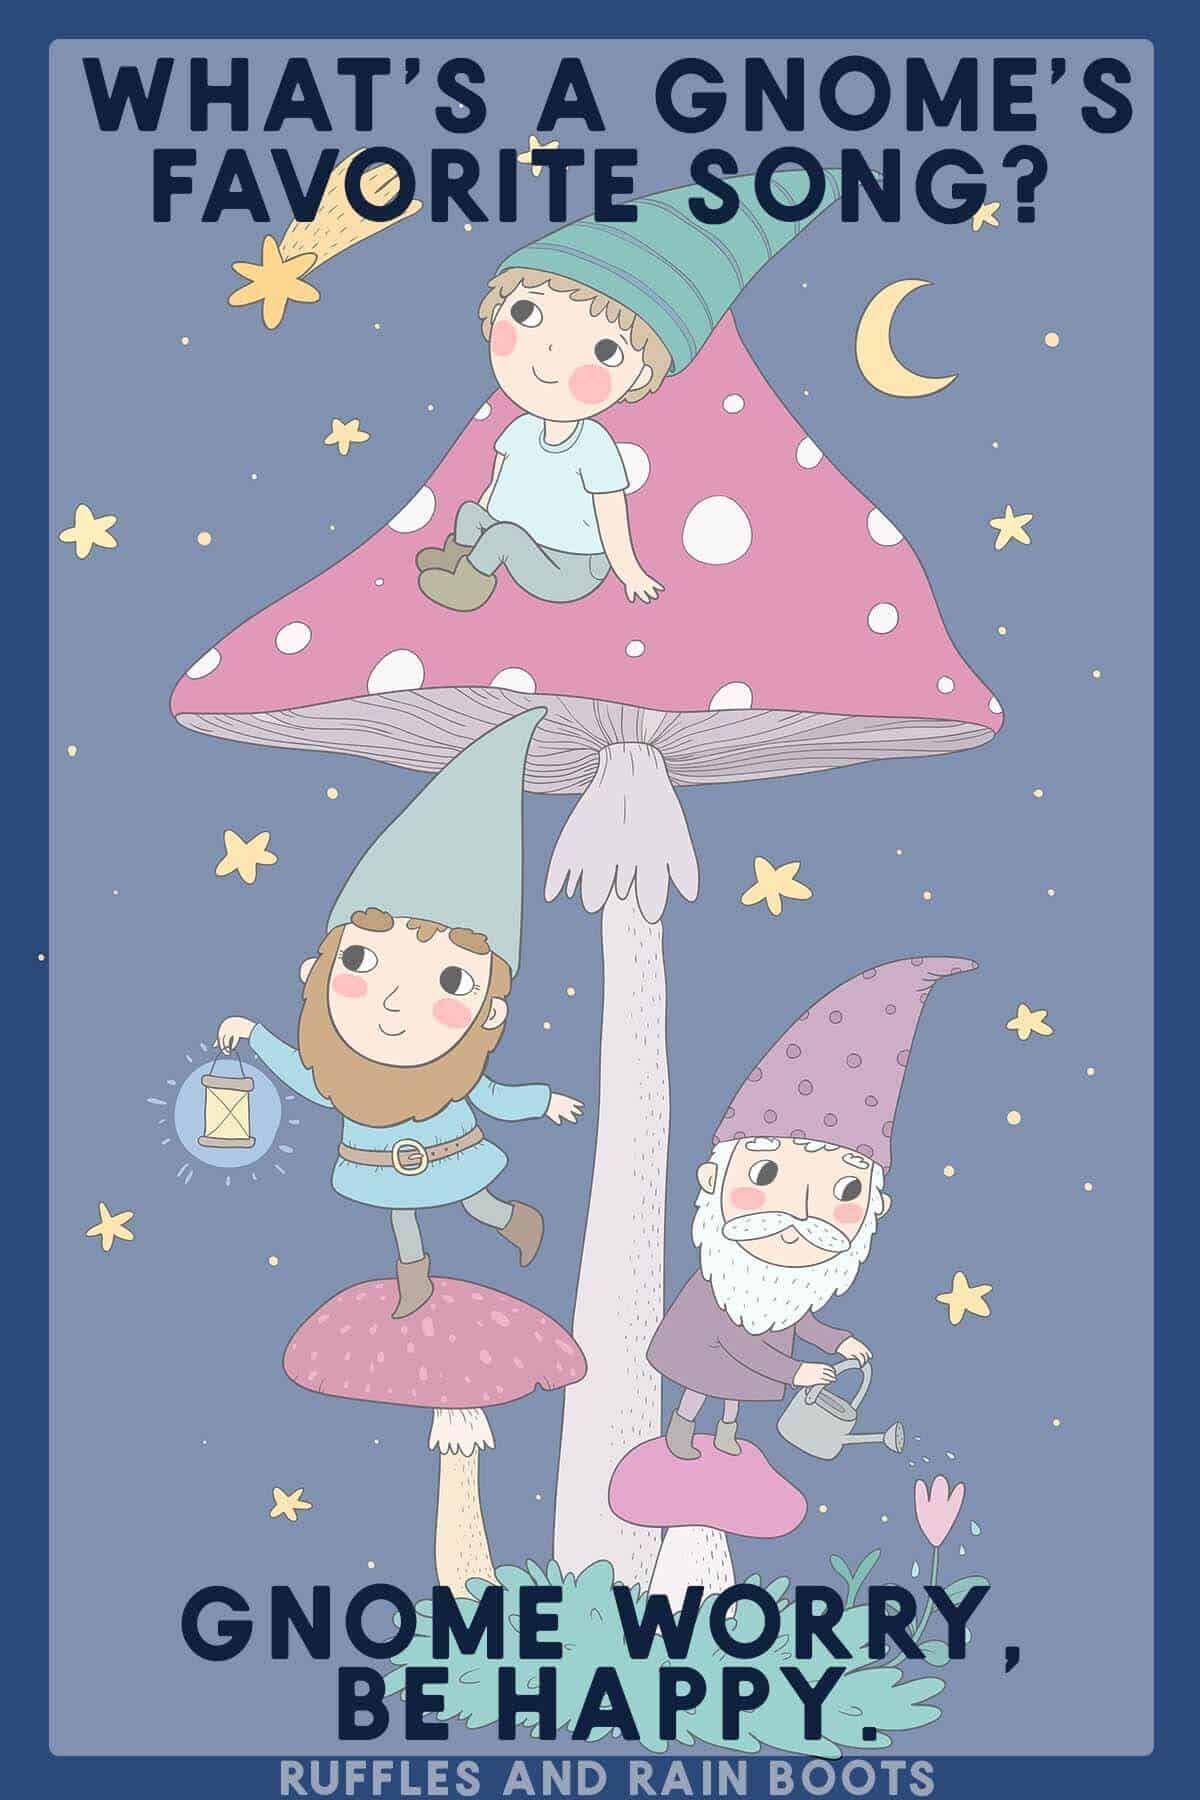 Vertical image of a gnome drawing with a gnome joke overlay.